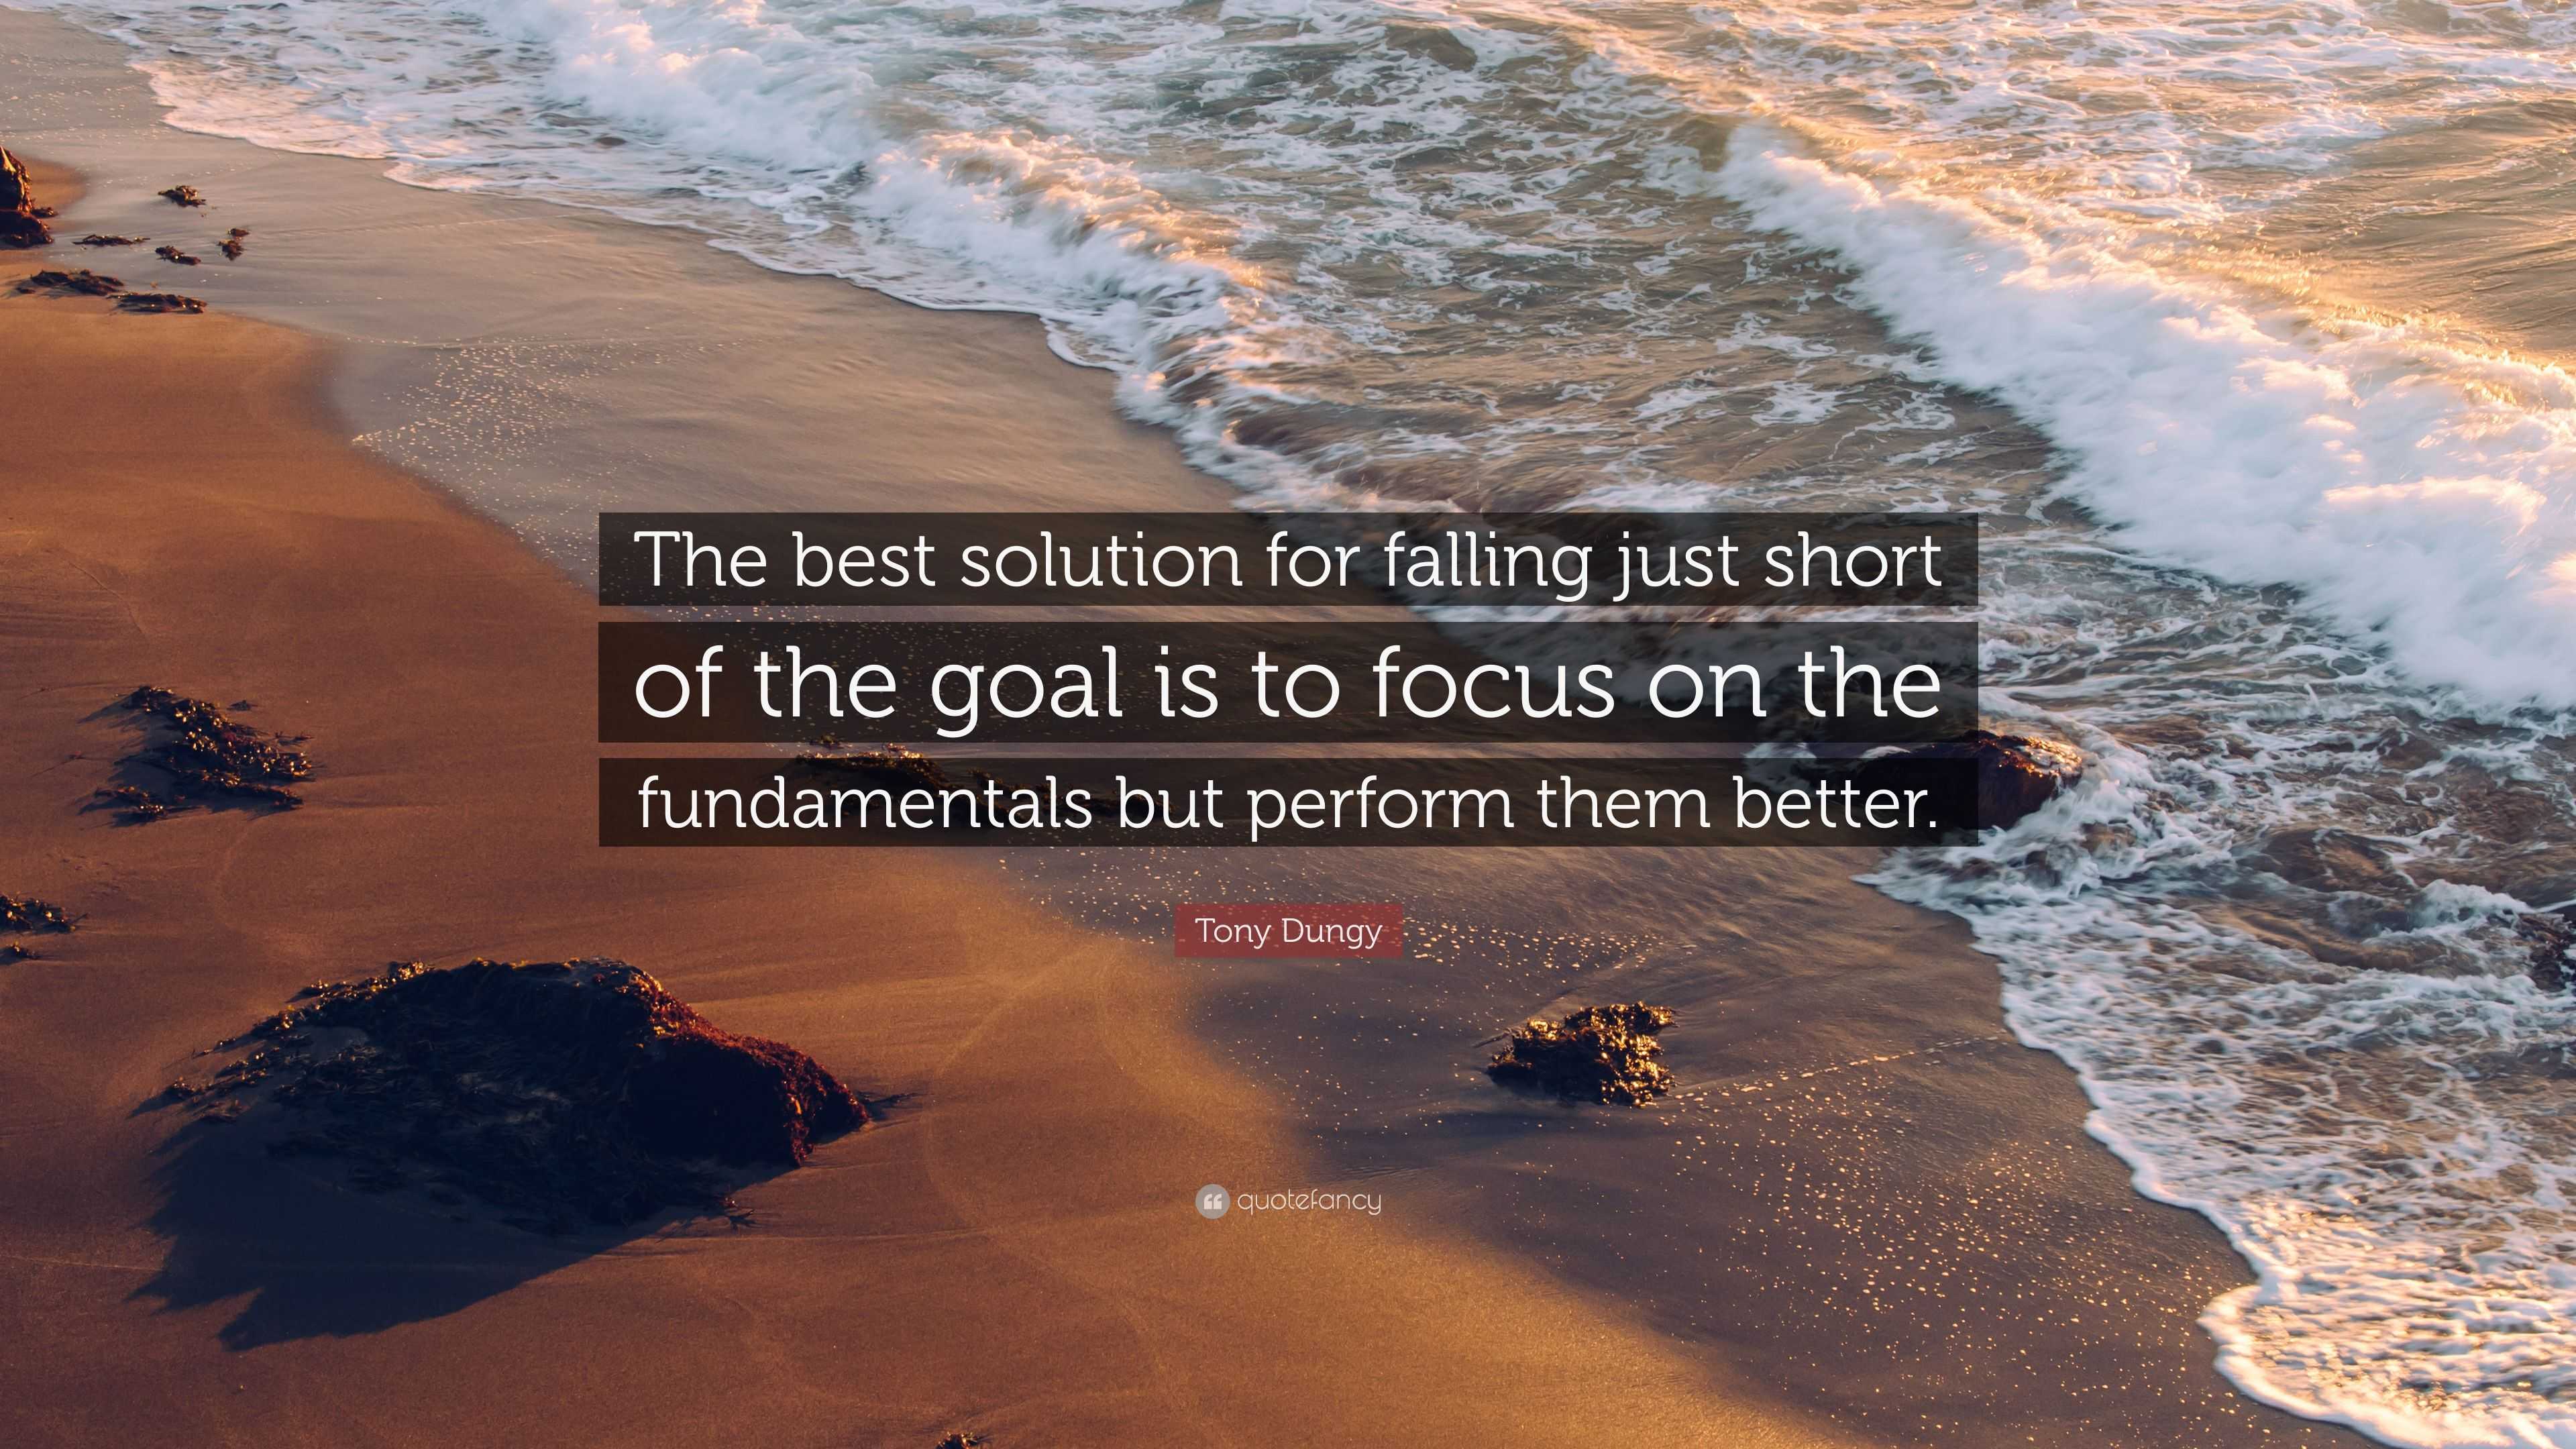 Tony Dungy Quote: “The best solution for falling just short of the goal is  to focus